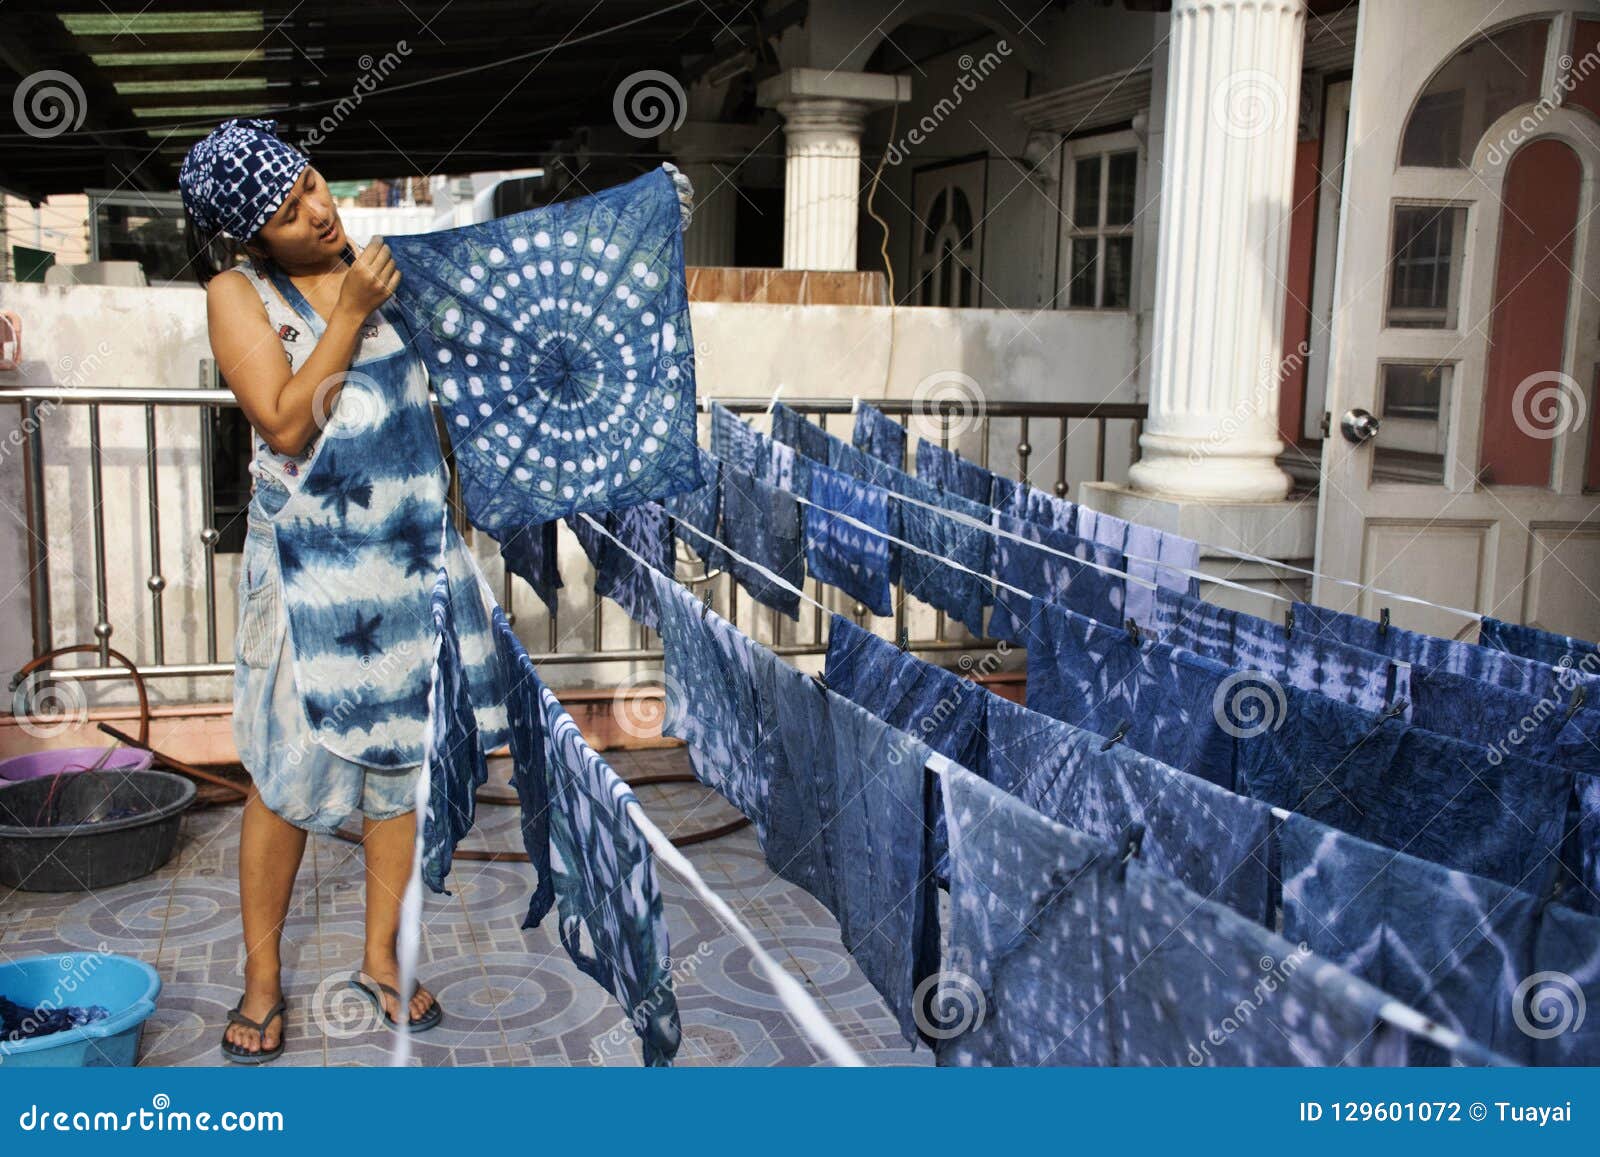 thai women working indigenous knowledge of thailand tie batik dyeing indigo color at outdoor on top of house at thailand